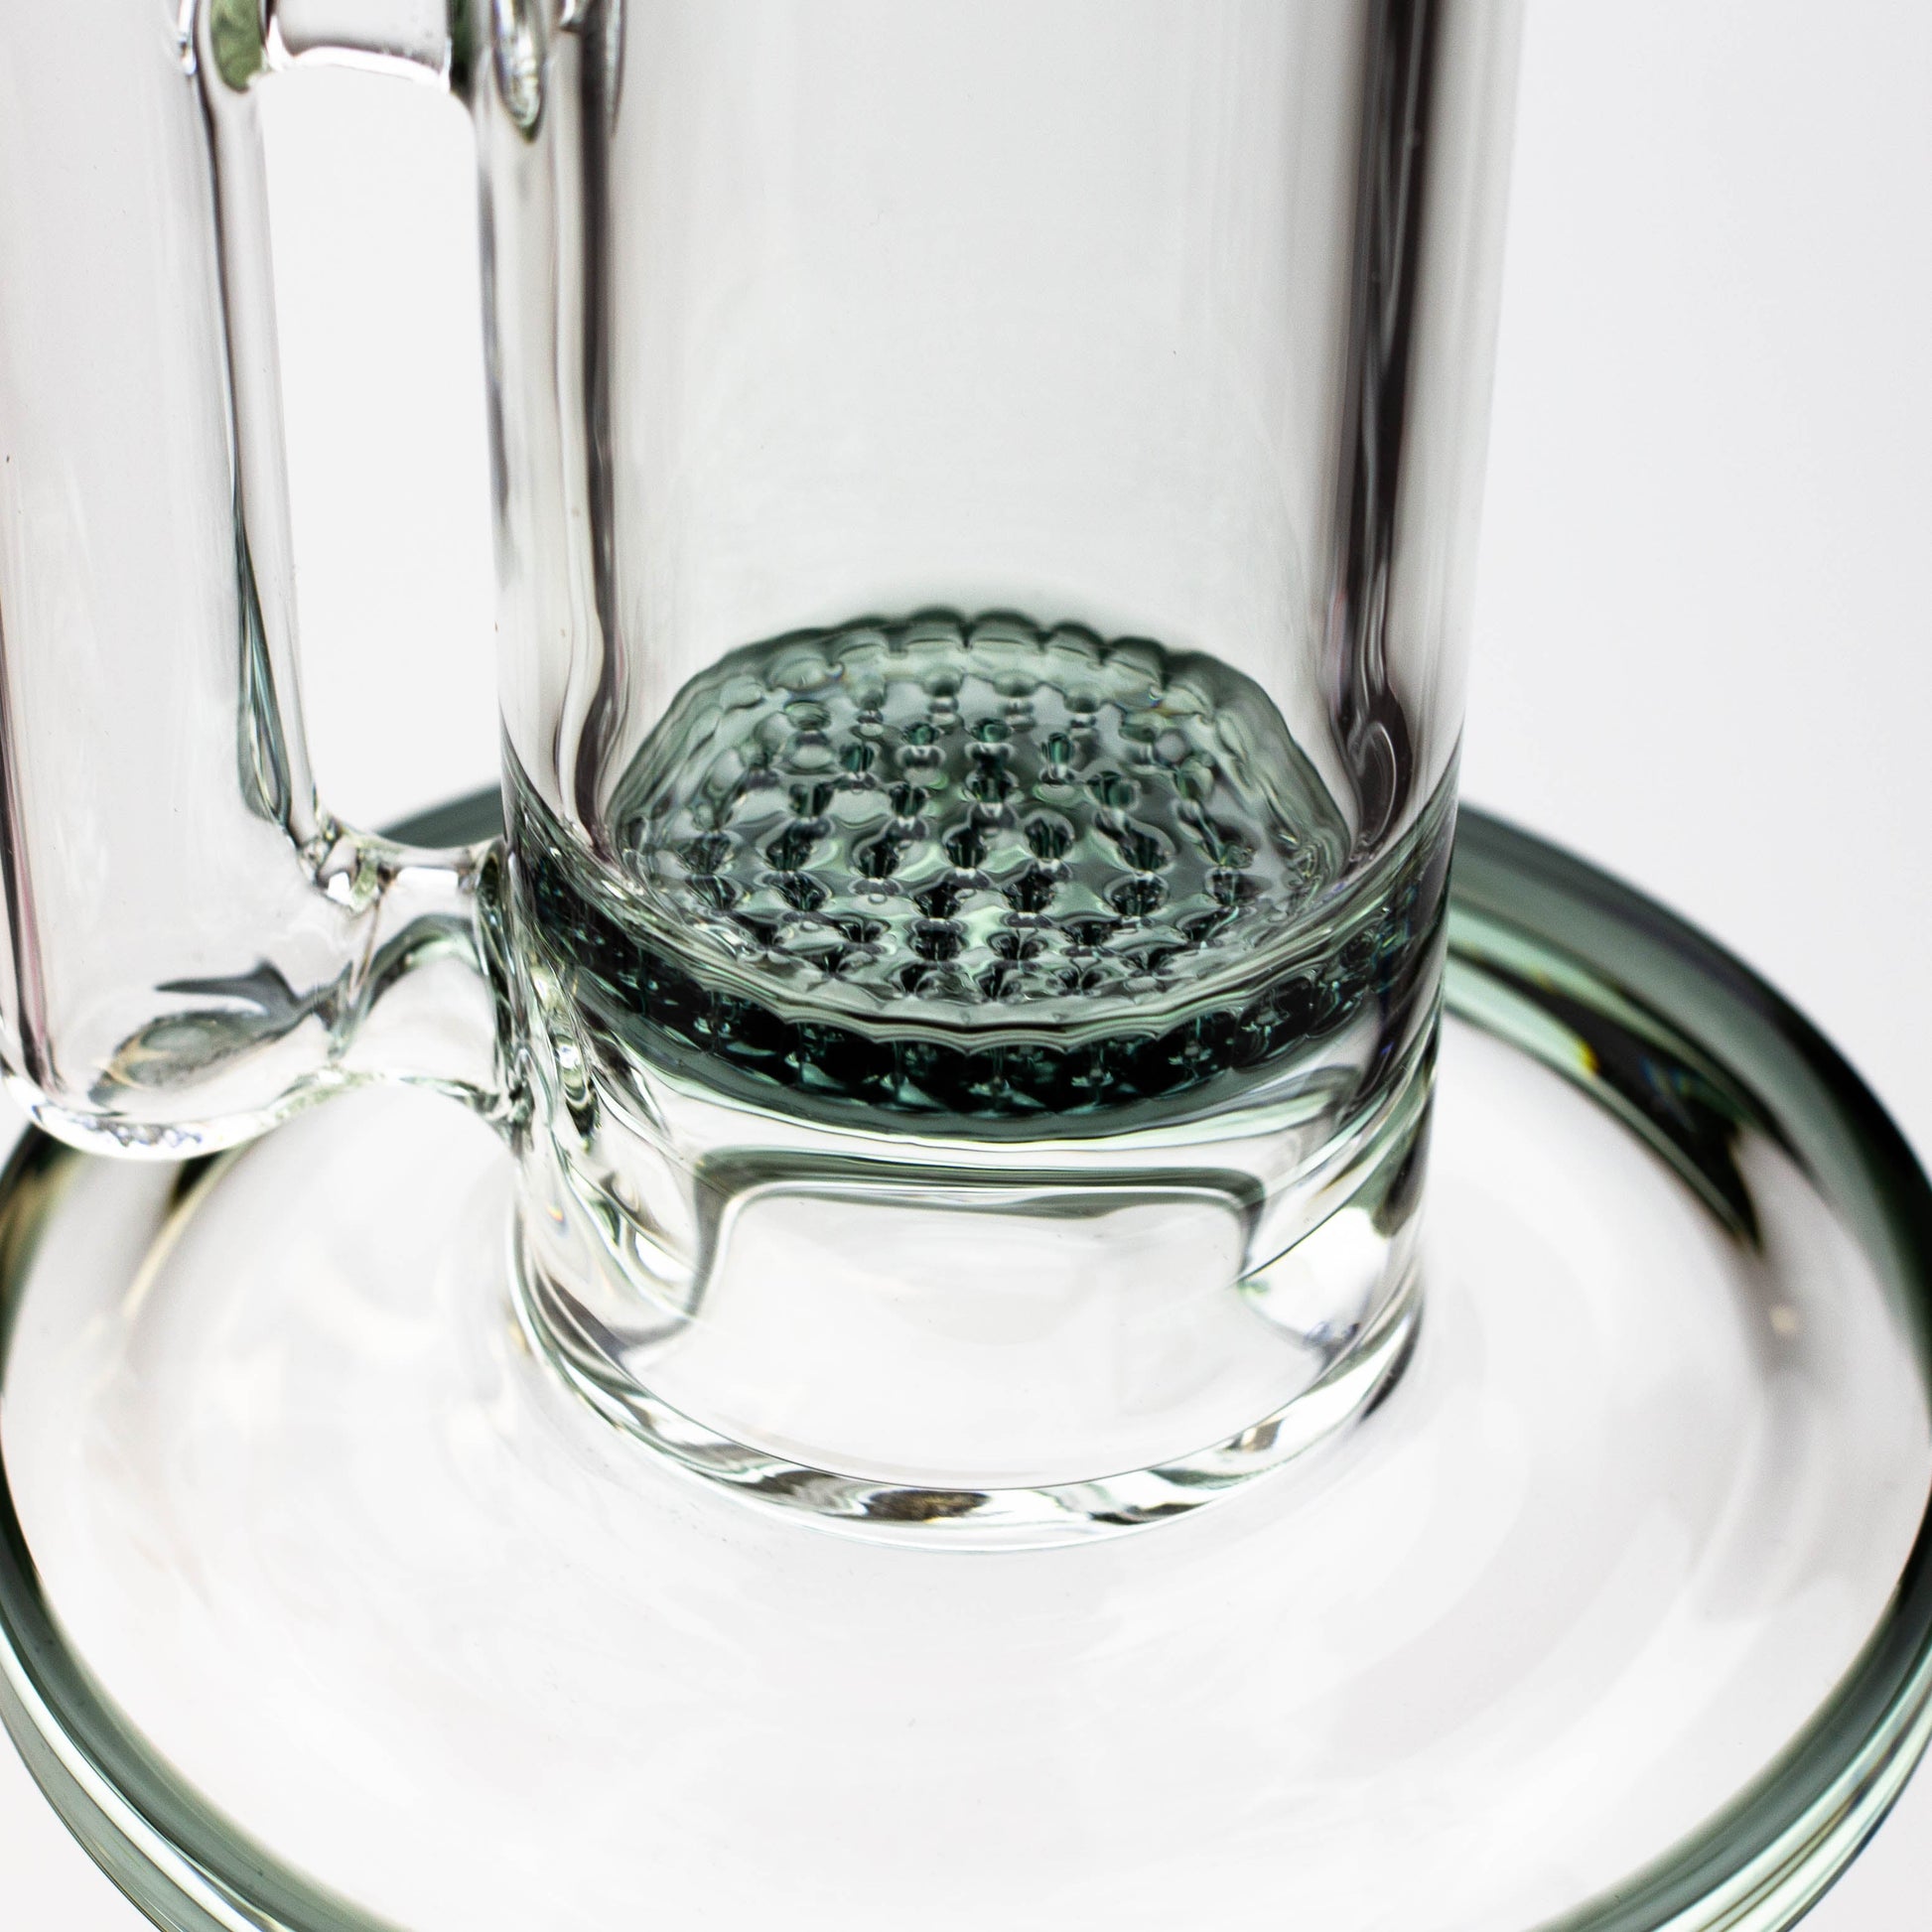 11.5" 2-in-1 7mm Kink glass water bong_3